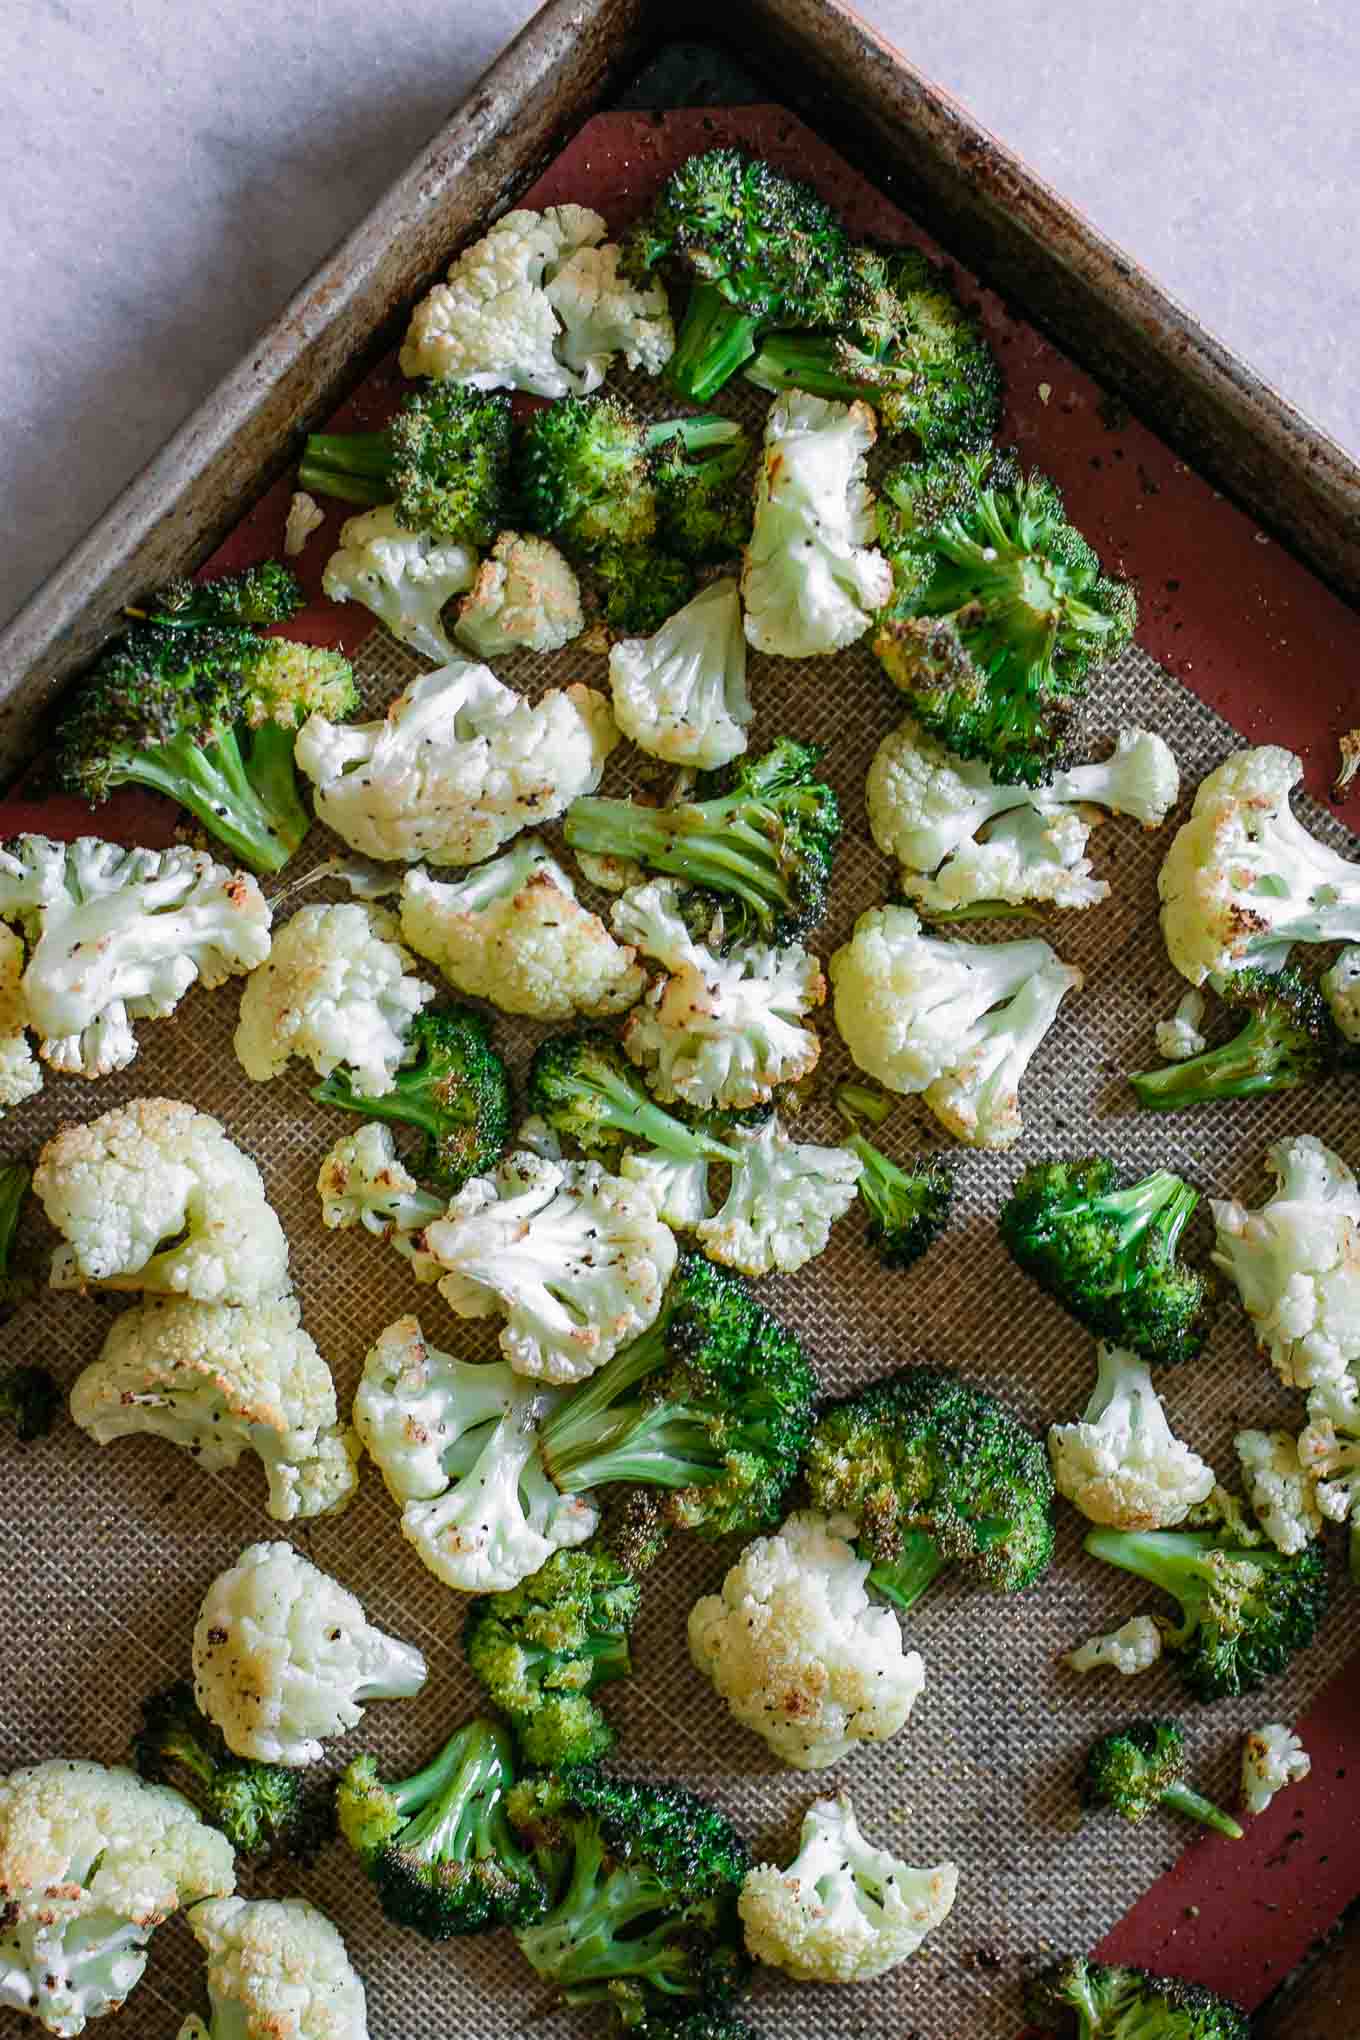 baked broccoli and cauliflower on a sheet pan after roasting